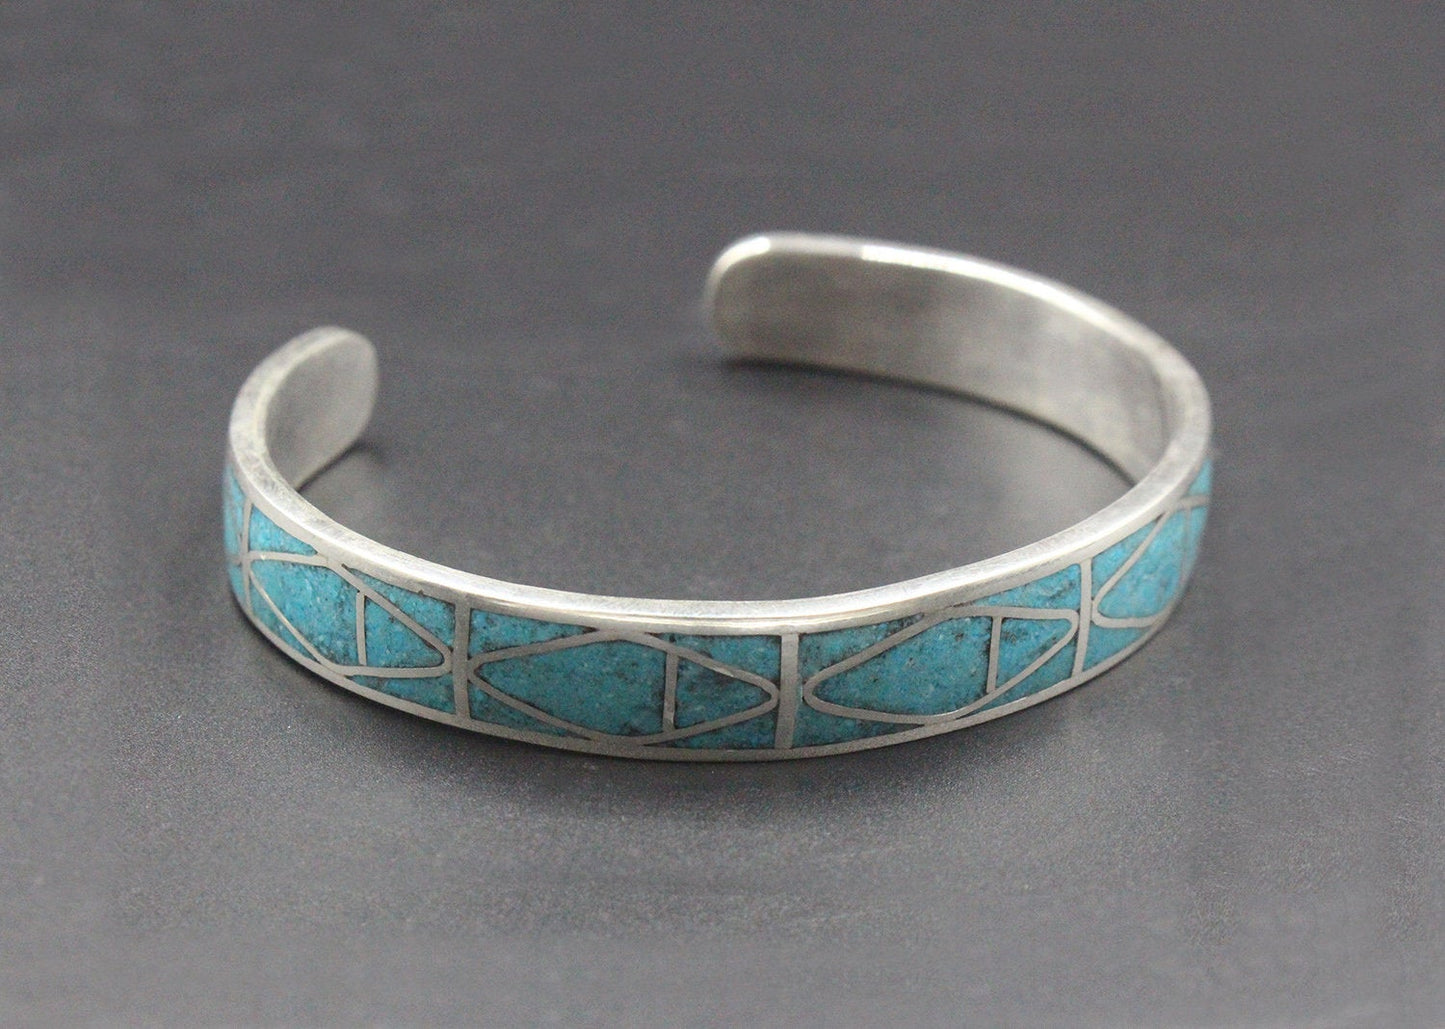 Turquoise and Sterling Silver Cuff Bracelet, Silver Cuff Bracelet, Turquoise Inlay Cuff Bracelet, Cuff Bracelet, Turquoise Cuff Bracelet